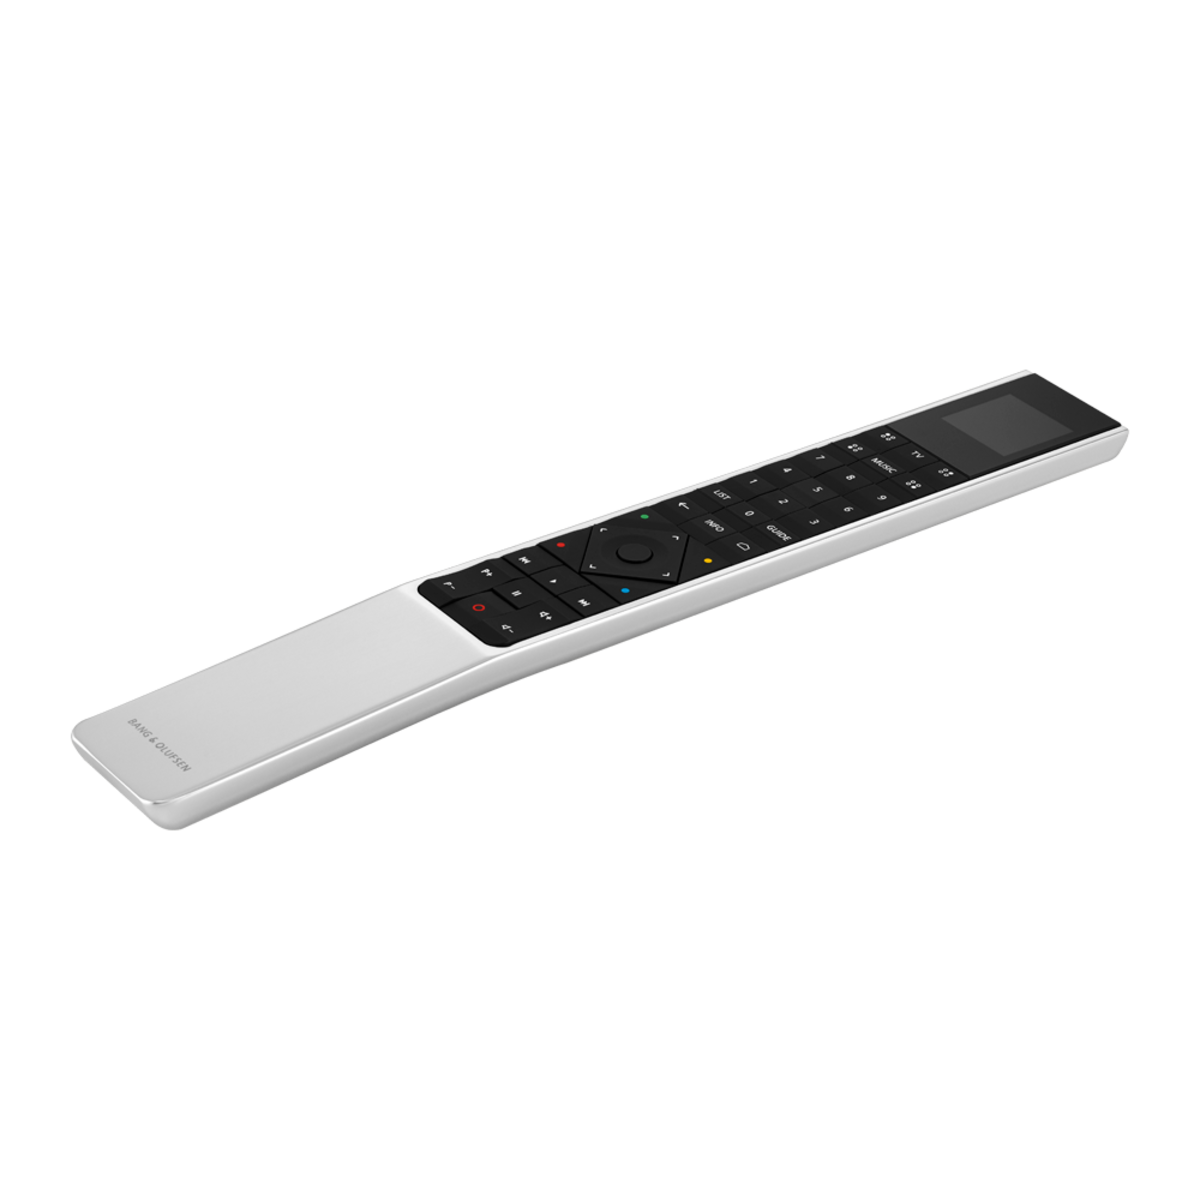 Bang & Olufsen BeoRemote One Remote Control